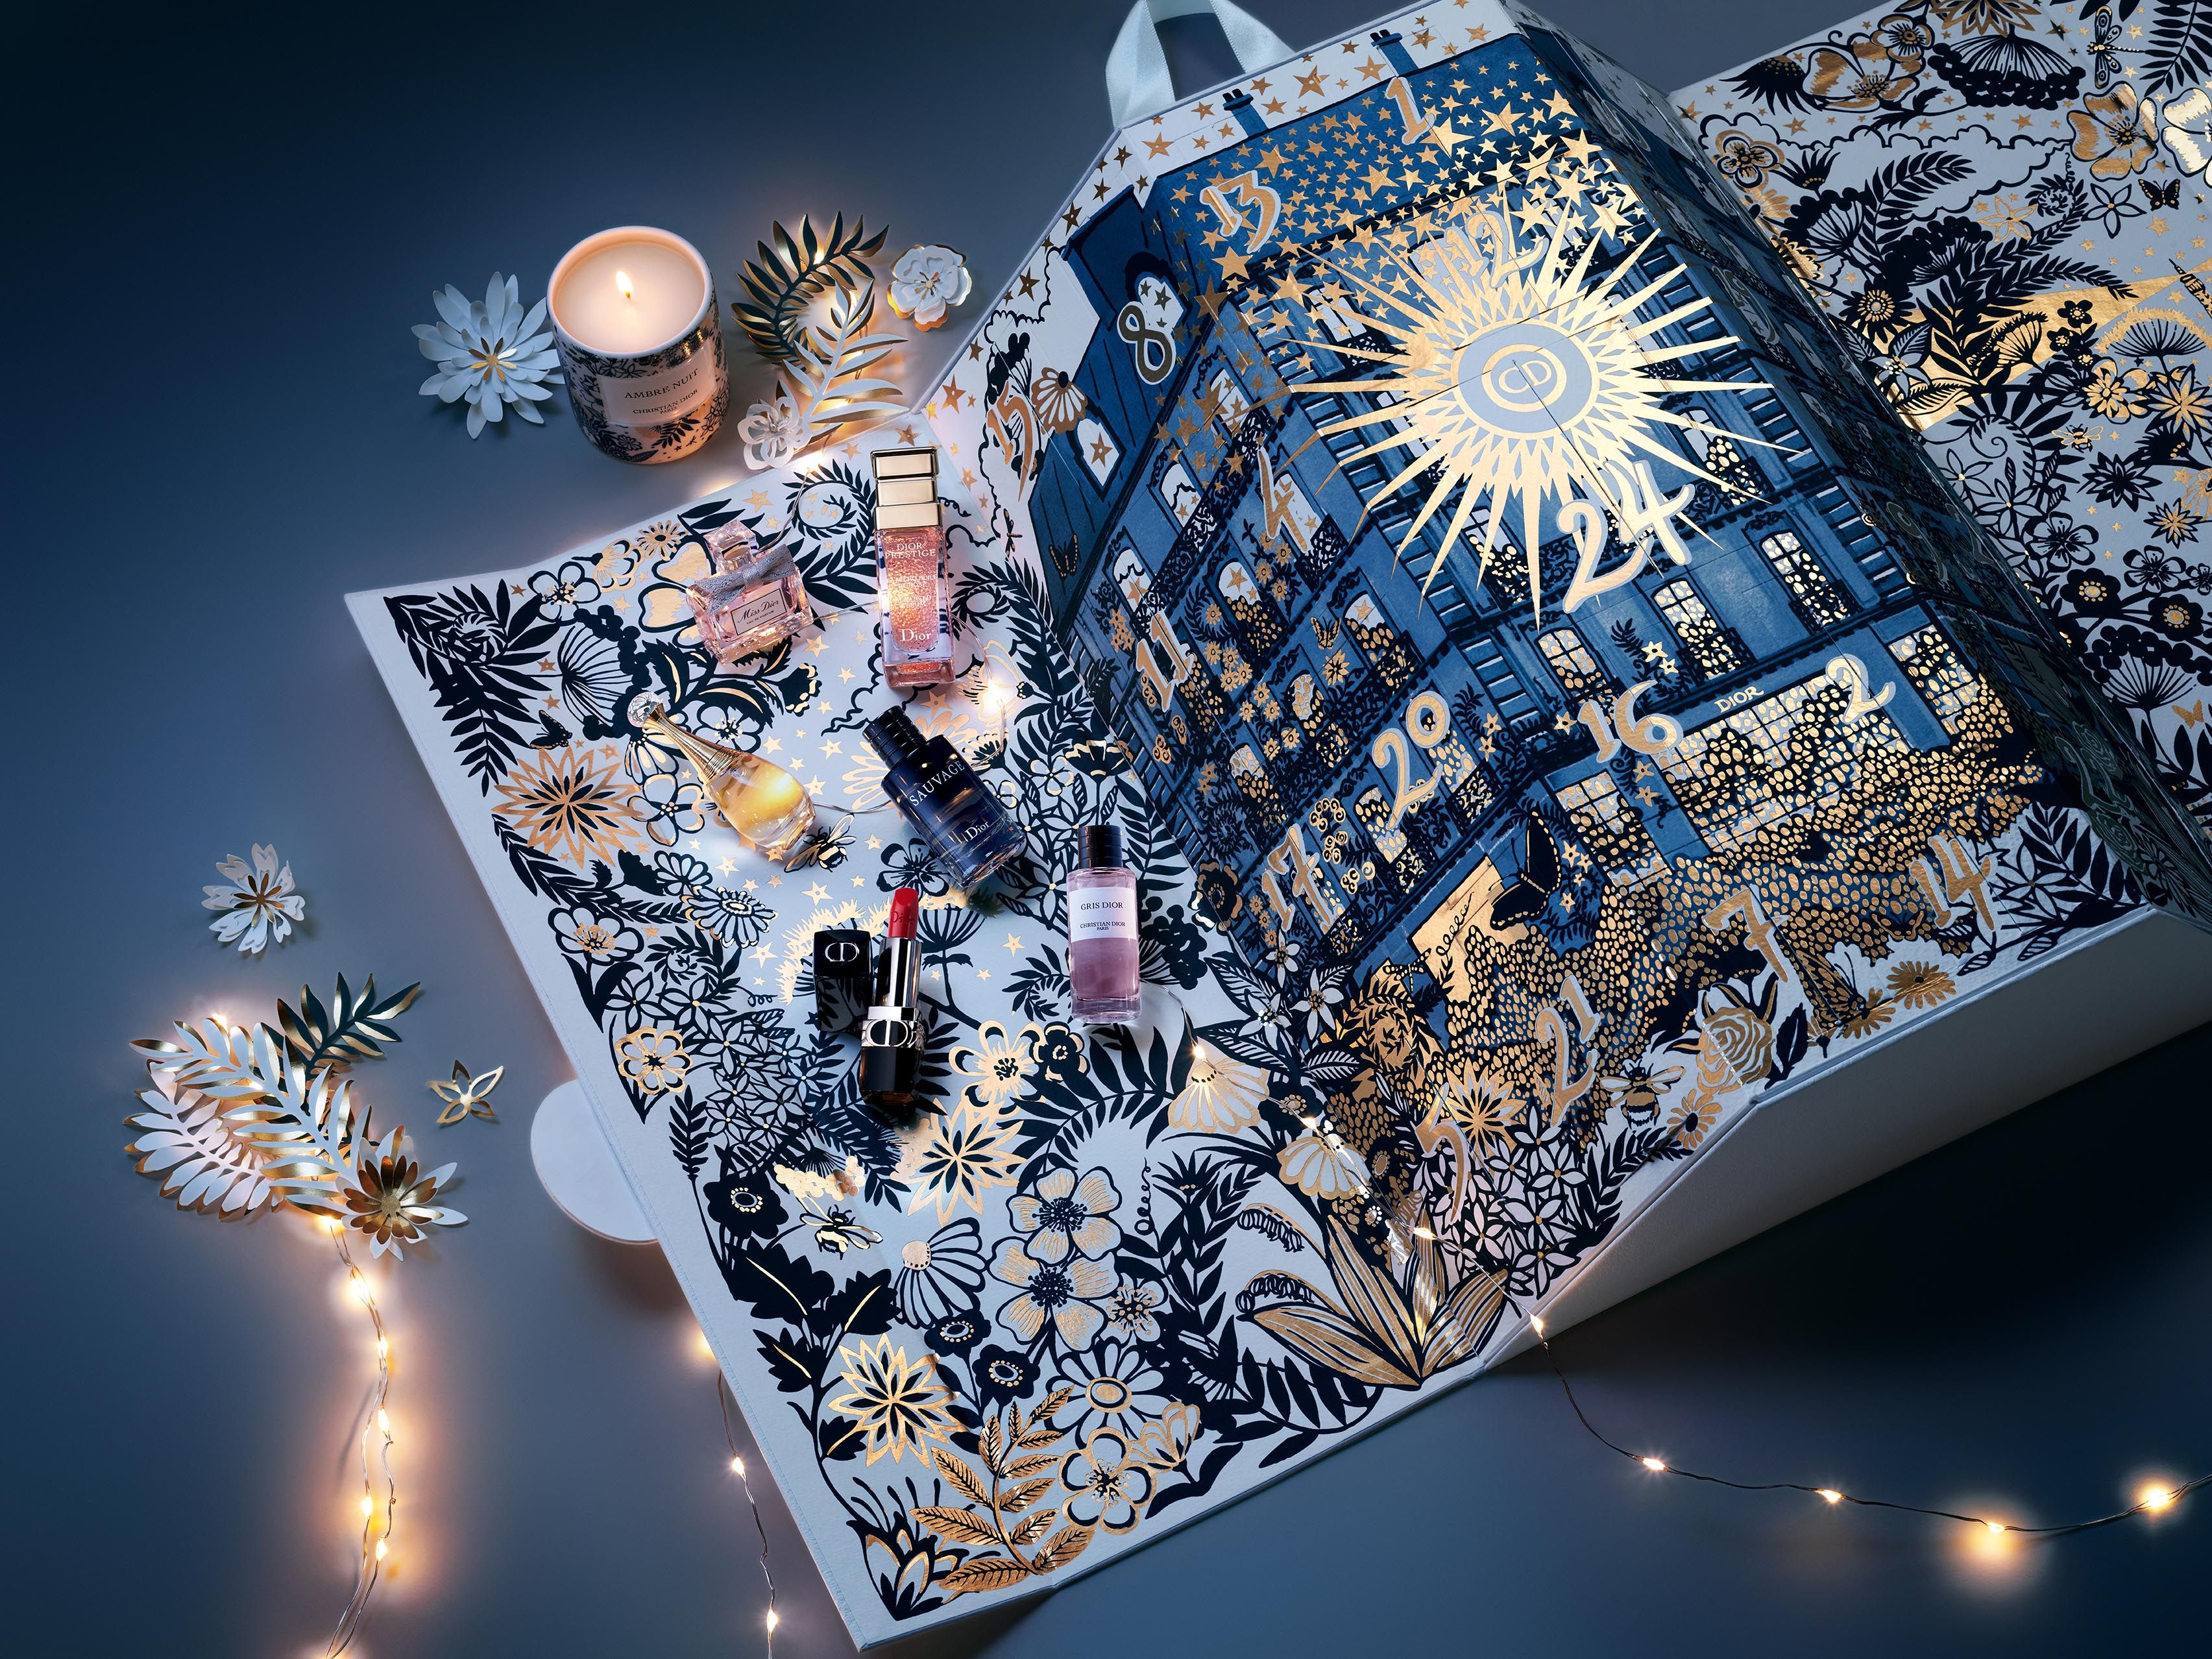 Dior's beauty advent calendar is the most spectacular of them all